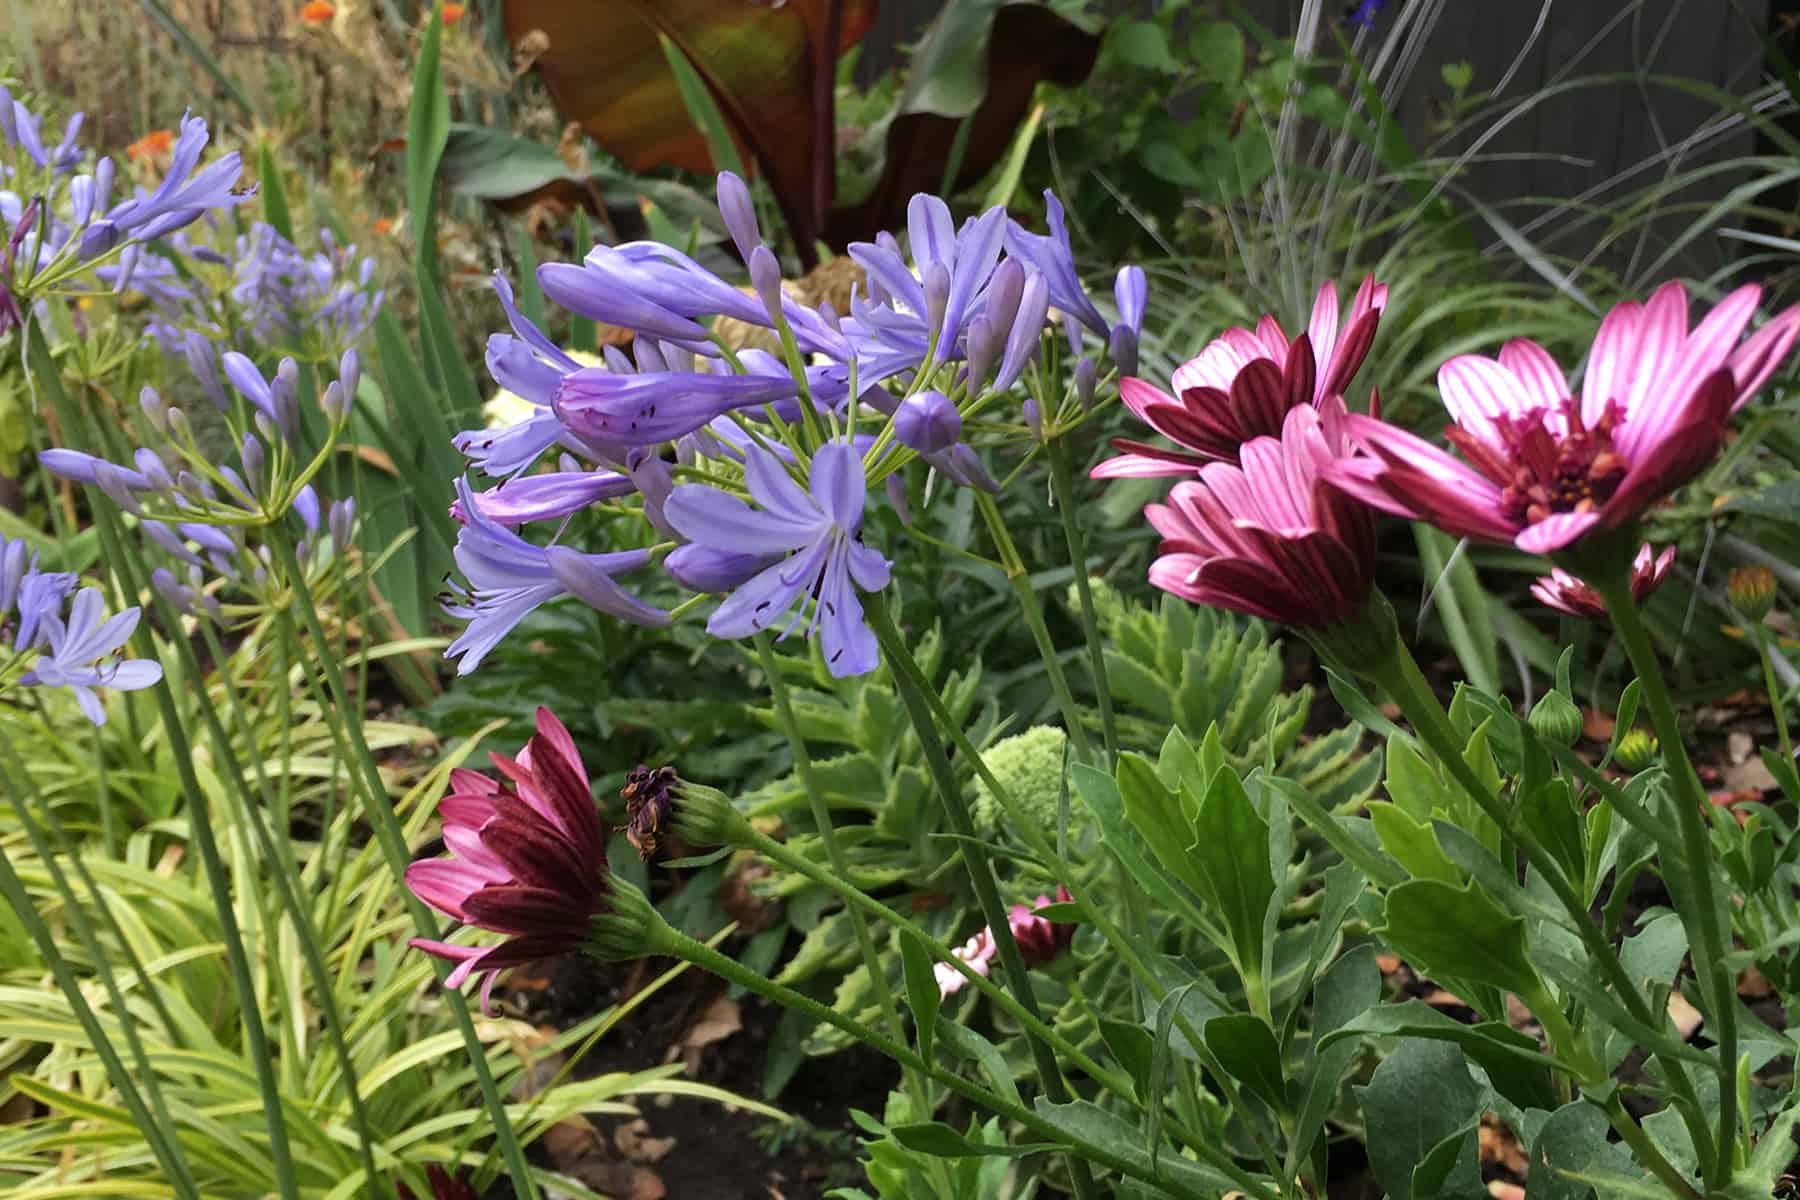 Mixed garden bed follows a sidewalk and includes Neverland Agapanthus, pink echinacea, Colocasia and other perennials